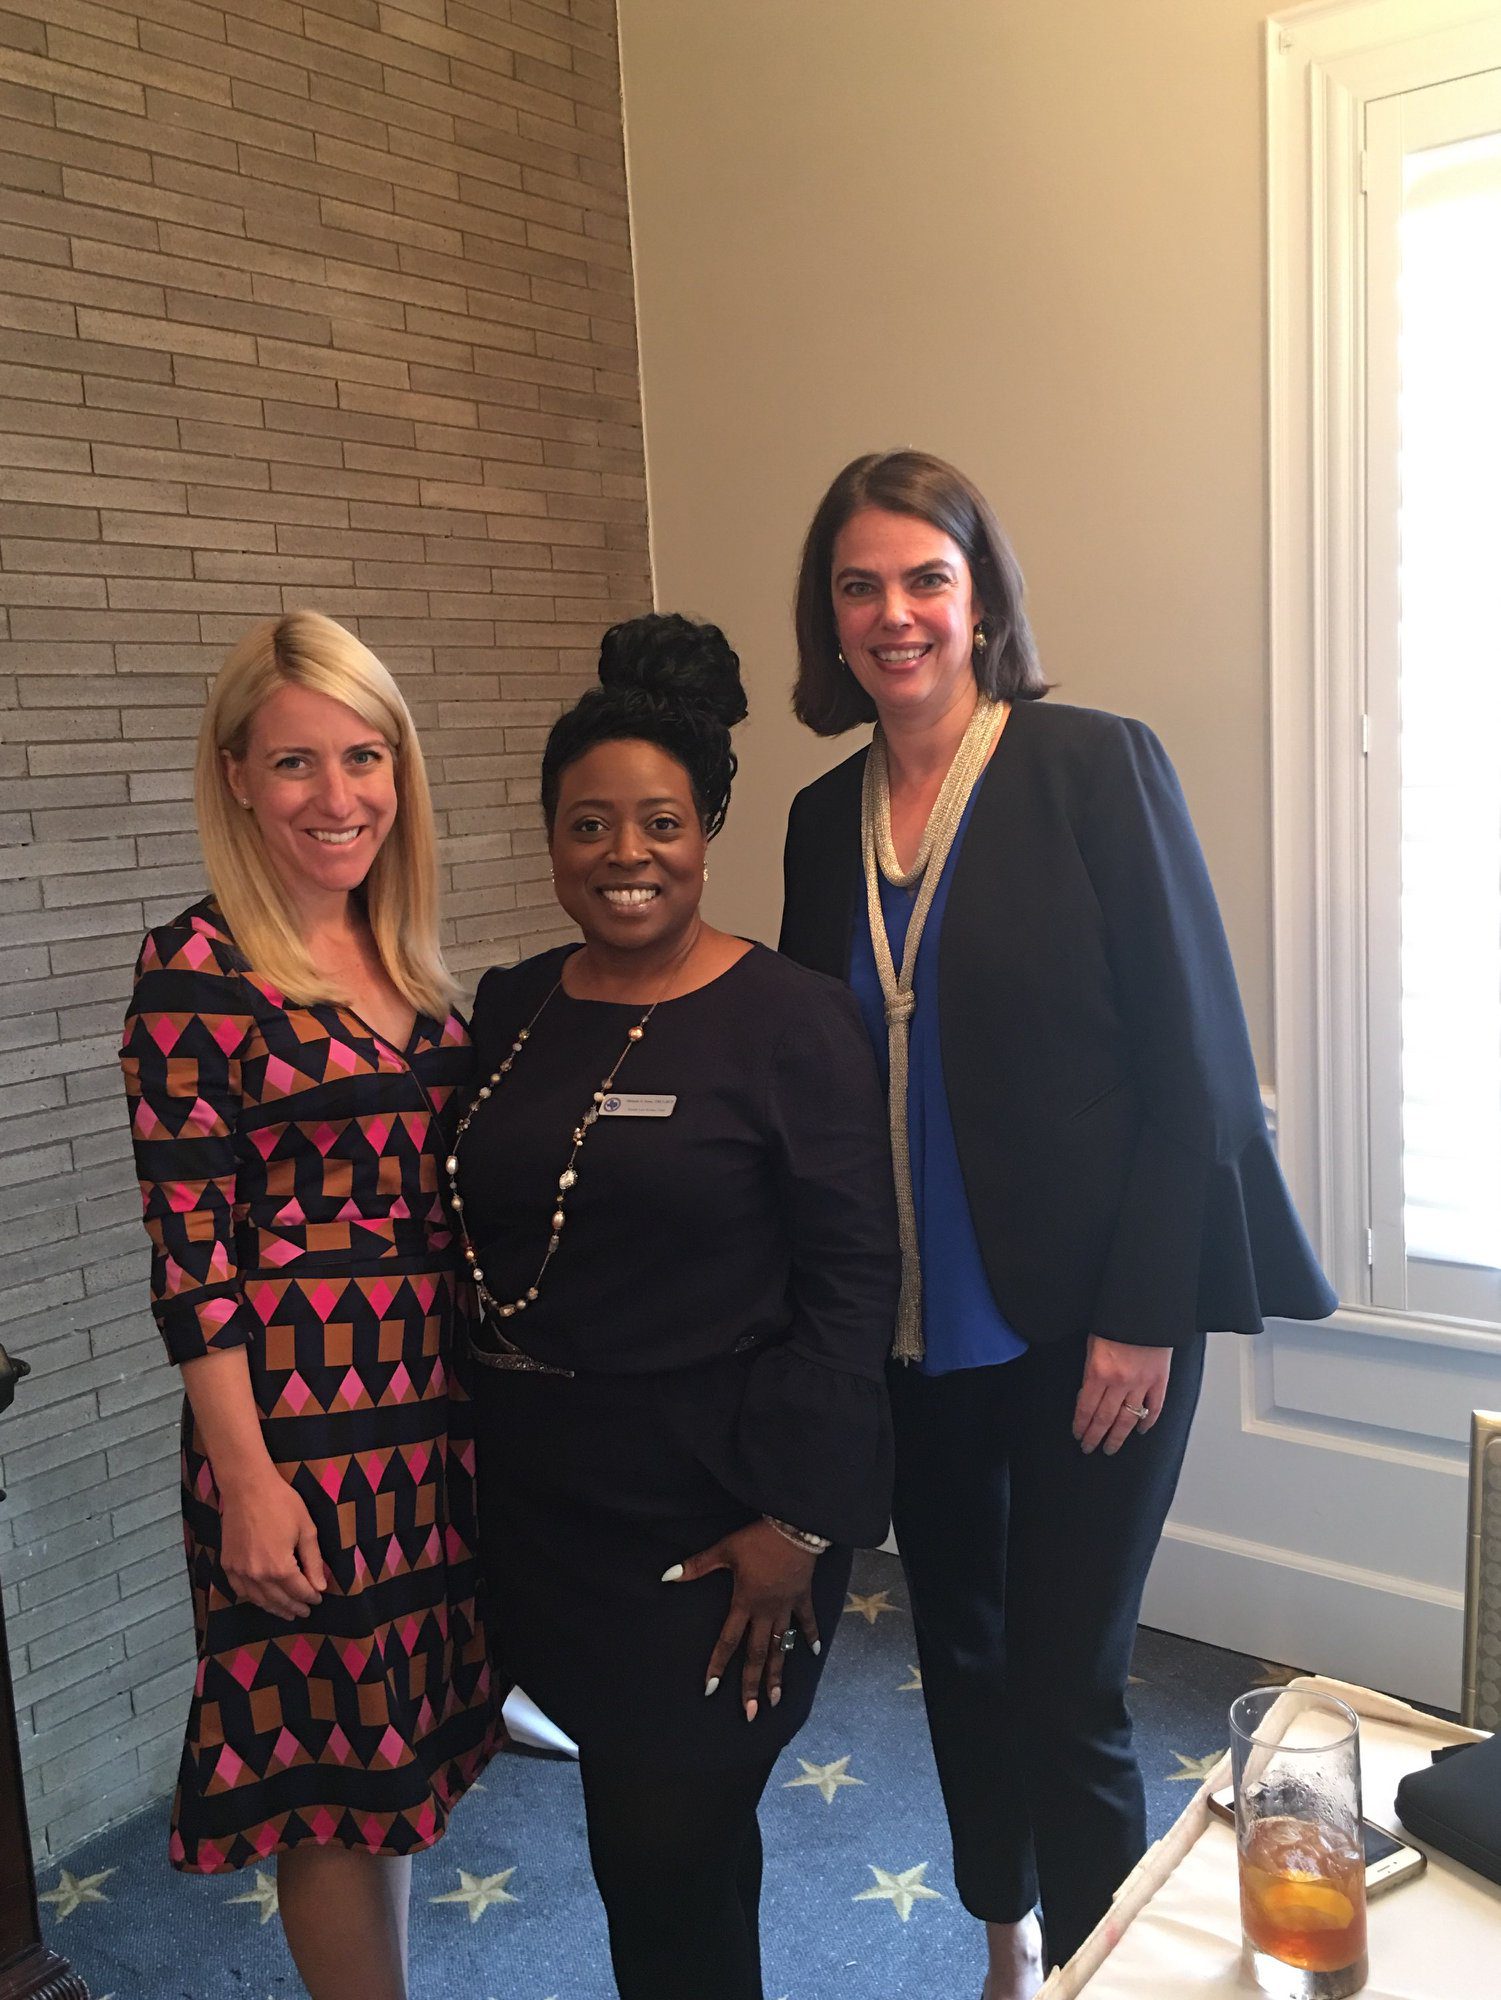 Katie Flowers Samler and Anita Savage at the Dallas Area Paralegal Association